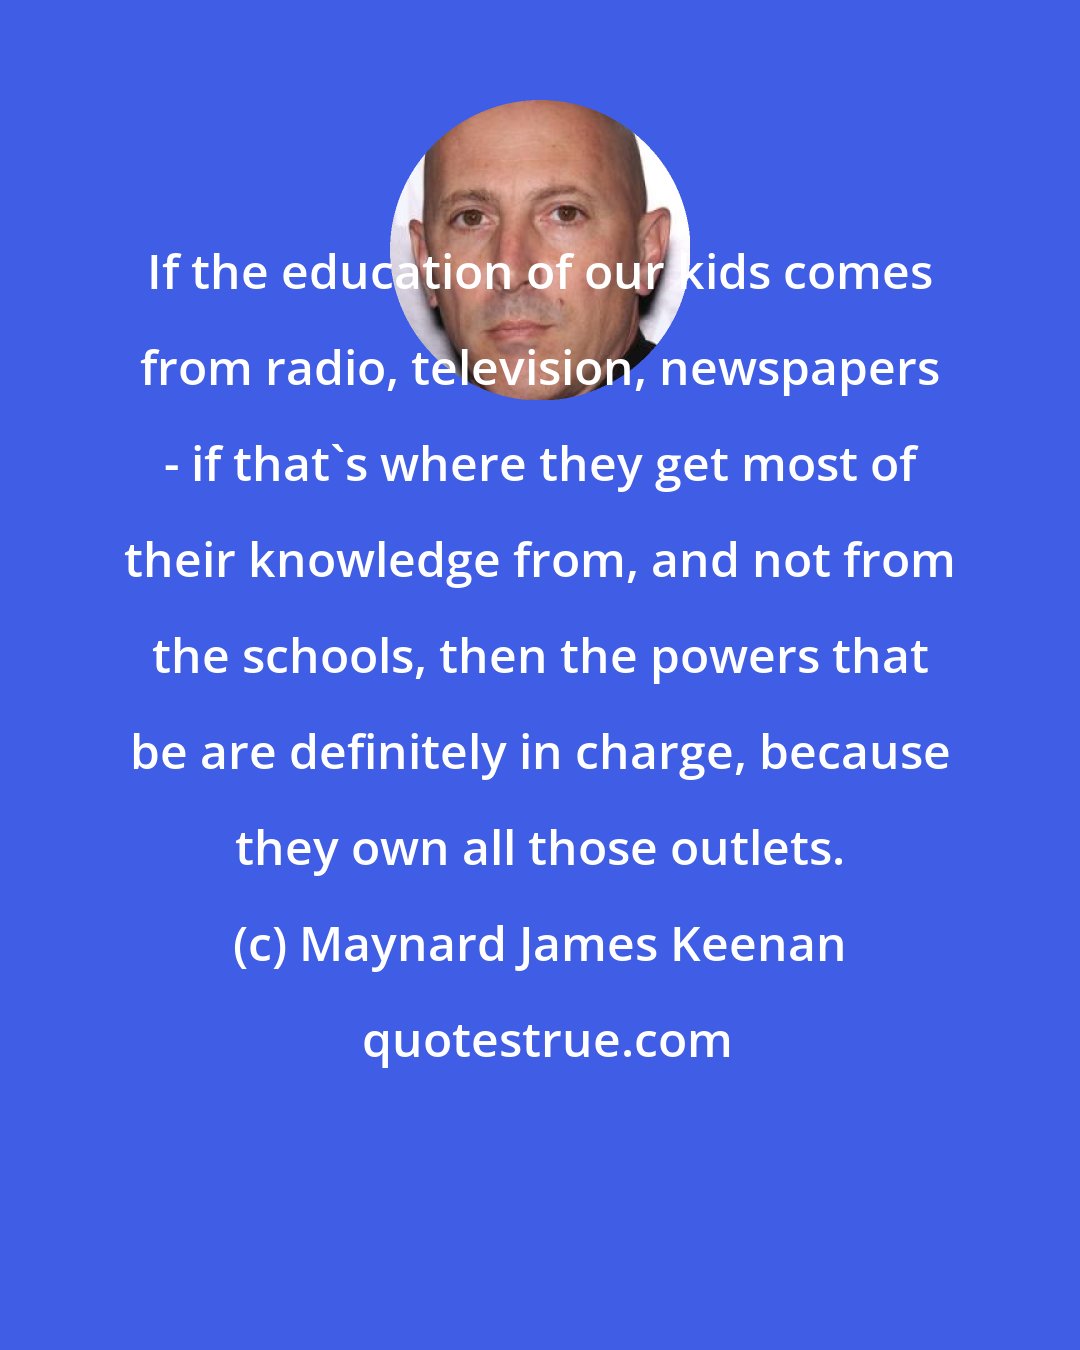 Maynard James Keenan: If the education of our kids comes from radio, television, newspapers - if that's where they get most of their knowledge from, and not from the schools, then the powers that be are definitely in charge, because they own all those outlets.